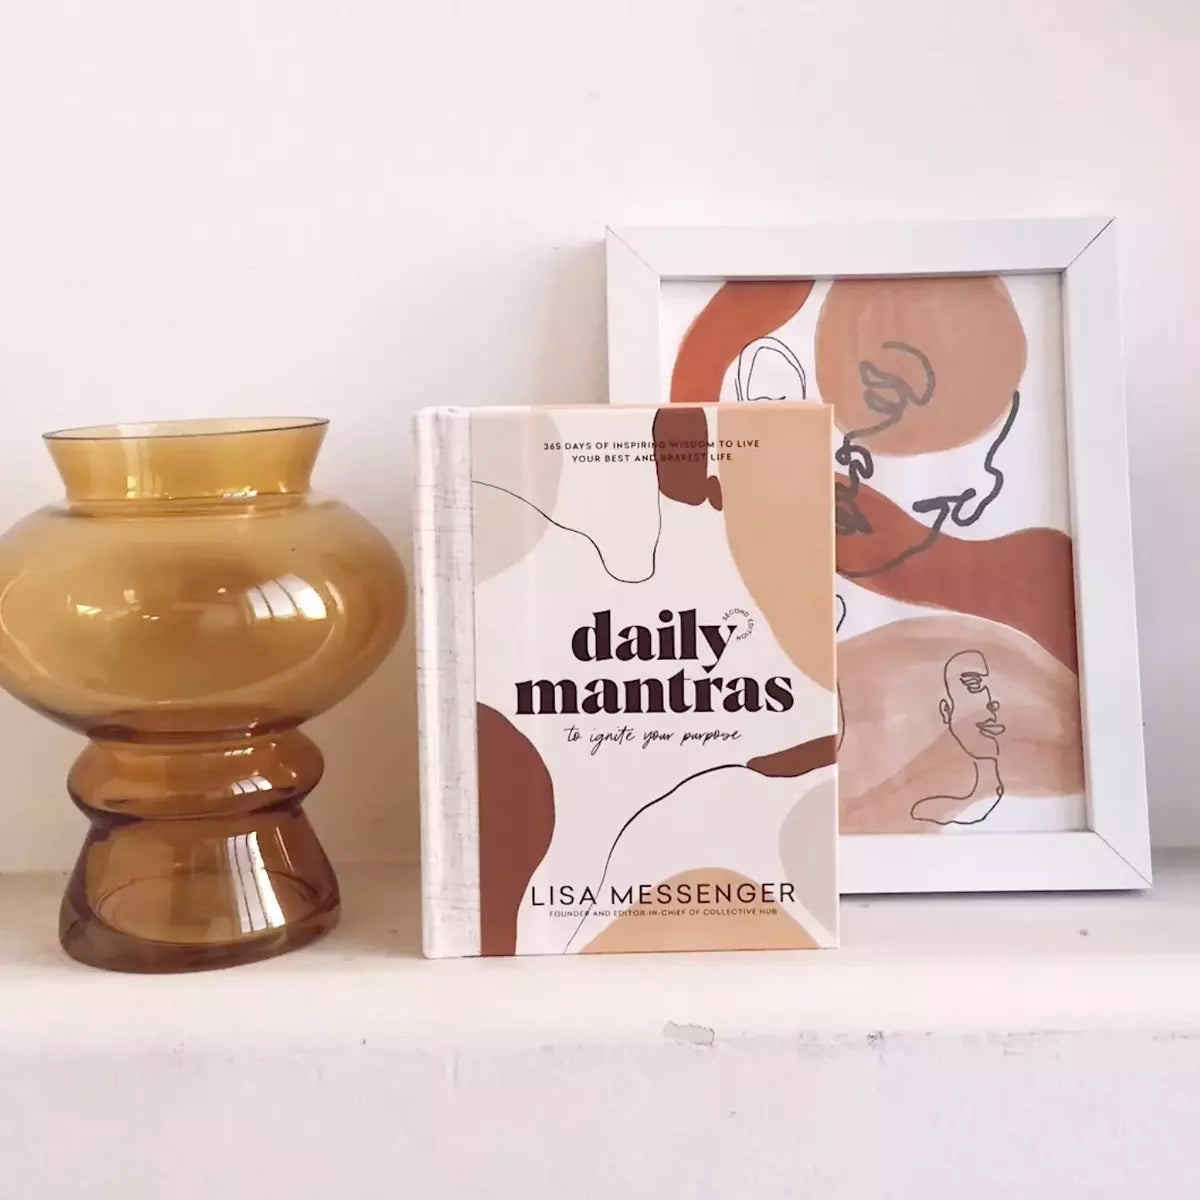 Collective Hub's "Daily Mantras to Ignite Your Purpose Second Edition" book on a table.